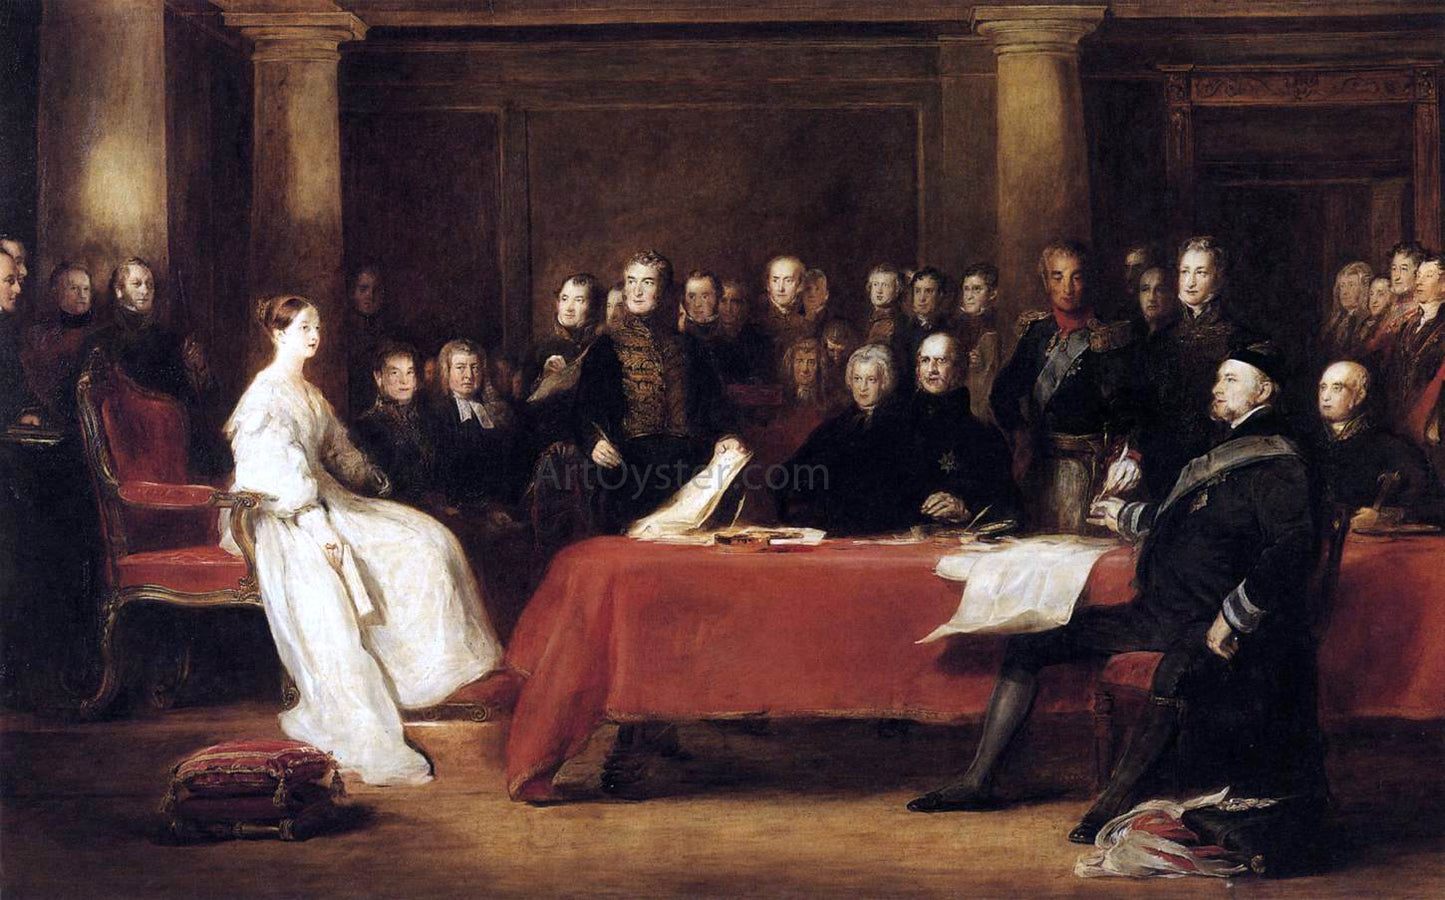  Sir David Wilkie The First Council of Queen Victoria - Hand Painted Oil Painting